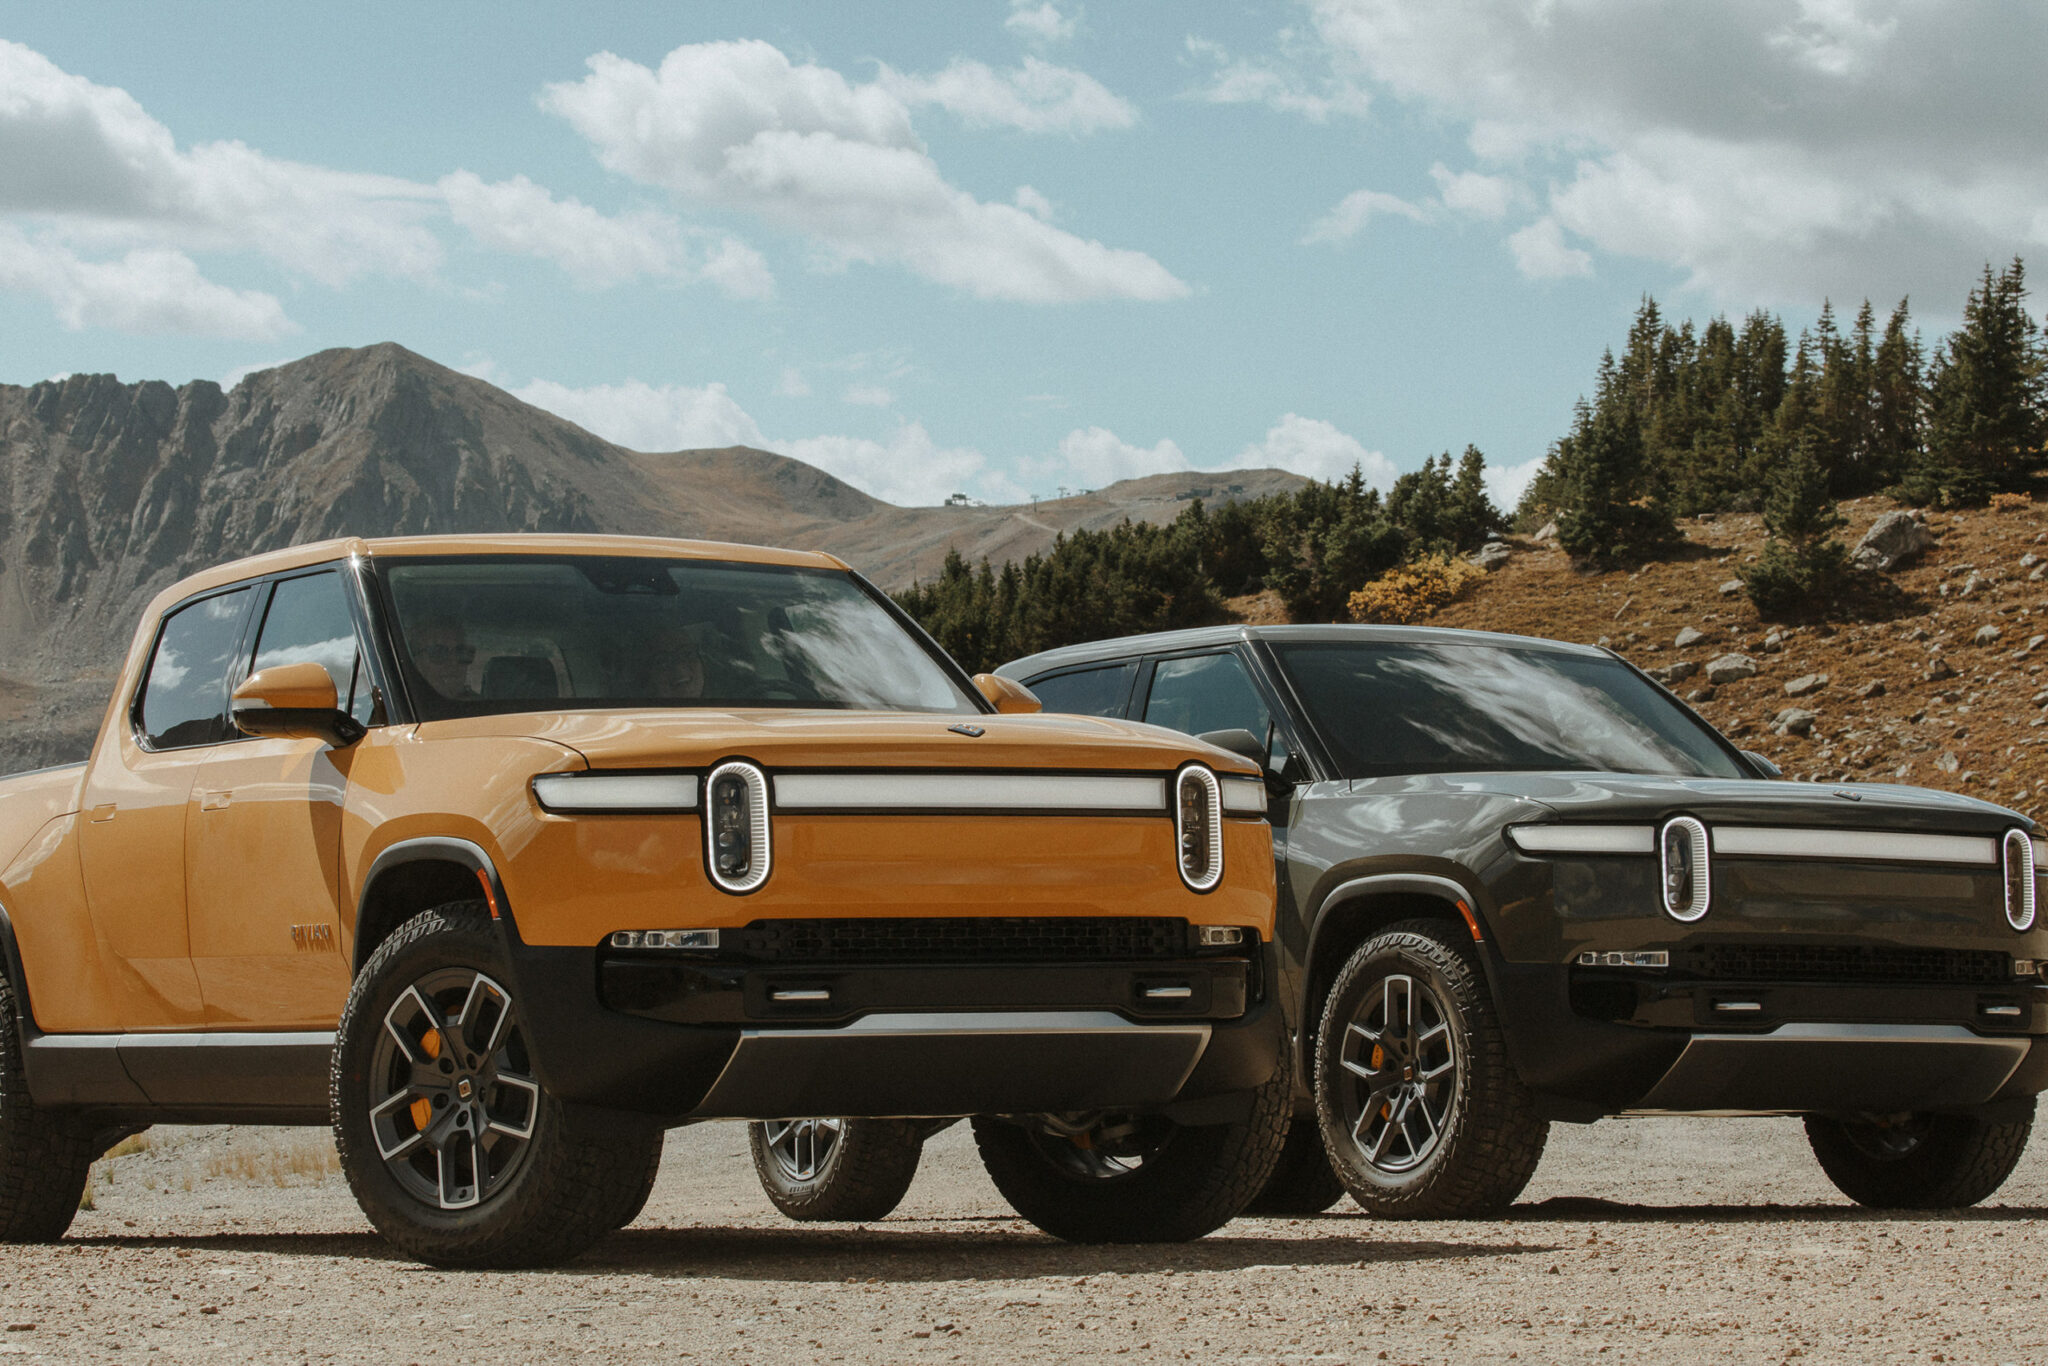 two rivian r1t electric vehicles